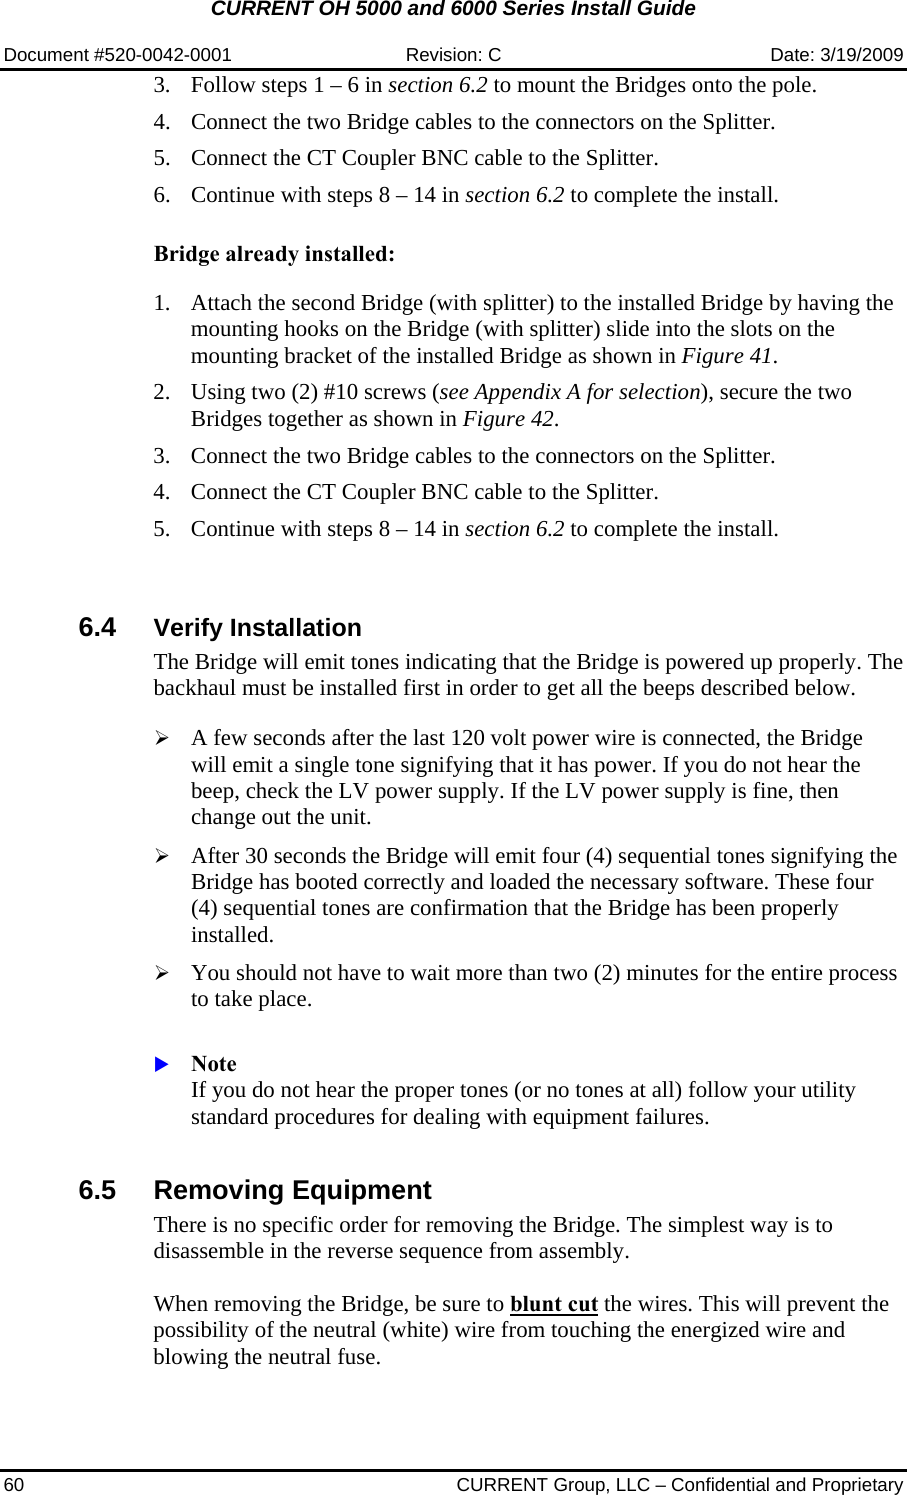 CURRENT OH 5000 and 6000 Series Install Guide  Document #520-0042-0001  Revision: C  Date: 3/19/2009 60  CURRENT Group, LLC – Confidential and Proprietary 3. Follow steps 1 – 6 in section 6.2 to mount the Bridges onto the pole. 4. Connect the two Bridge cables to the connectors on the Splitter. 5. Connect the CT Coupler BNC cable to the Splitter. 6. Continue with steps 8 – 14 in section 6.2 to complete the install.  Bridge already installed:  1. Attach the second Bridge (with splitter) to the installed Bridge by having the mounting hooks on the Bridge (with splitter) slide into the slots on the mounting bracket of the installed Bridge as shown in Figure 41. 2. Using two (2) #10 screws (see Appendix A for selection), secure the two Bridges together as shown in Figure 42. 3. Connect the two Bridge cables to the connectors on the Splitter. 4. Connect the CT Coupler BNC cable to the Splitter. 5. Continue with steps 8 – 14 in section 6.2 to complete the install.   6.4  Verify Installation The Bridge will emit tones indicating that the Bridge is powered up properly. The backhaul must be installed first in order to get all the beeps described below.  ¾ A few seconds after the last 120 volt power wire is connected, the Bridge will emit a single tone signifying that it has power. If you do not hear the beep, check the LV power supply. If the LV power supply is fine, then change out the unit.  ¾ After 30 seconds the Bridge will emit four (4) sequential tones signifying the Bridge has booted correctly and loaded the necessary software. These four (4) sequential tones are confirmation that the Bridge has been properly installed.  ¾ You should not have to wait more than two (2) minutes for the entire process to take place.   X Note If you do not hear the proper tones (or no tones at all) follow your utility standard procedures for dealing with equipment failures.    6.5 Removing Equipment There is no specific order for removing the Bridge. The simplest way is to disassemble in the reverse sequence from assembly.  When removing the Bridge, be sure to blunt cut the wires. This will prevent the possibility of the neutral (white) wire from touching the energized wire and blowing the neutral fuse.   